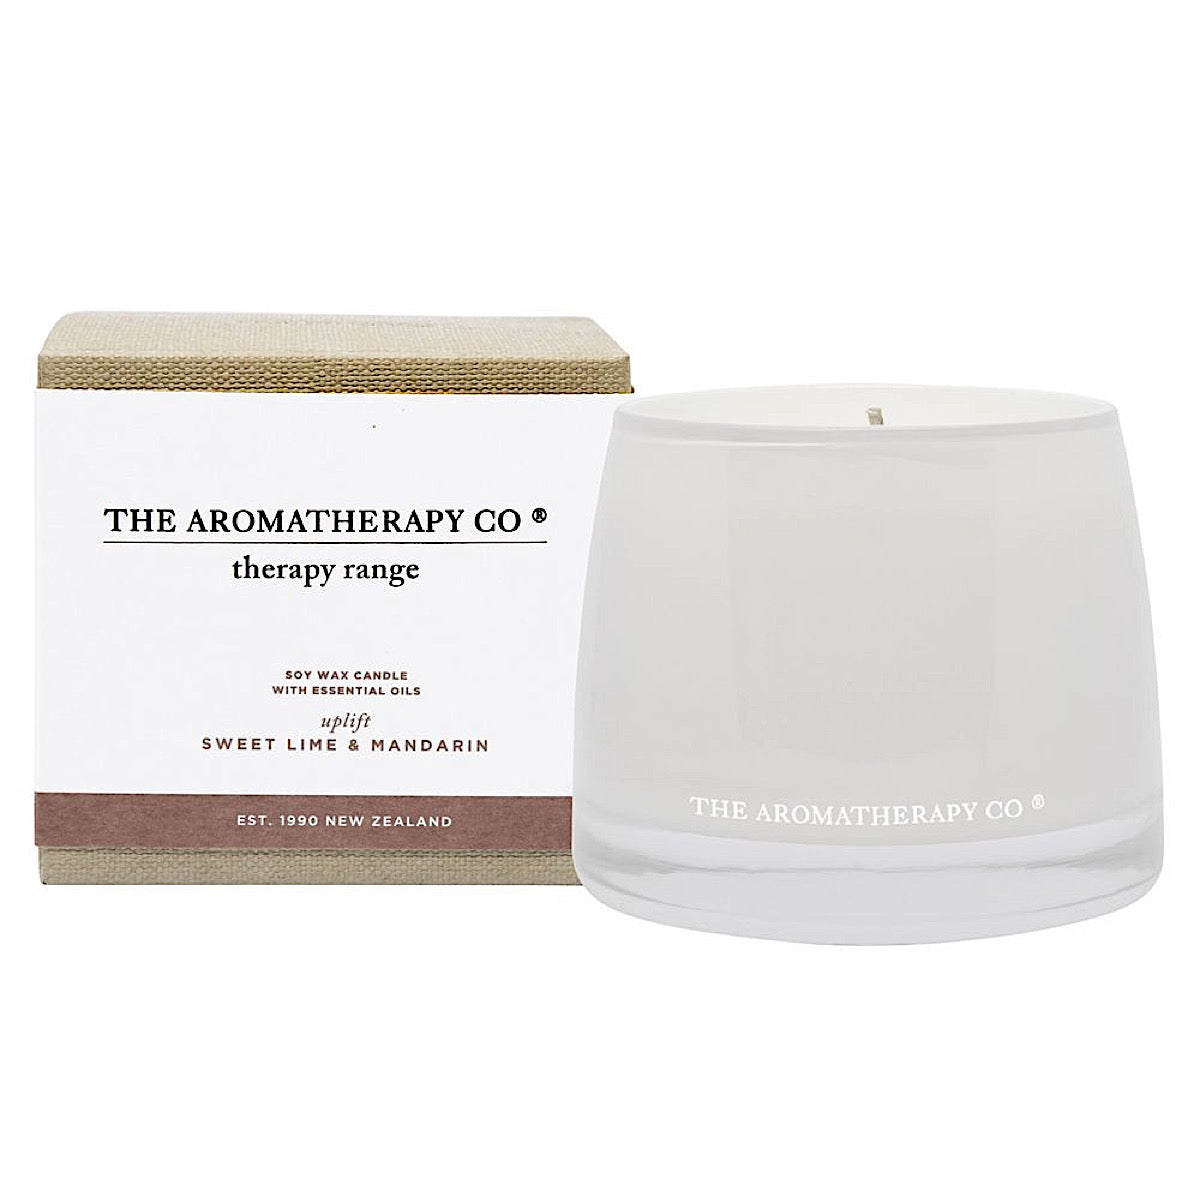 The Aromatherapy Co Therapy Range Uplift Lime & Mandarin Candle at More Than Just A Gift